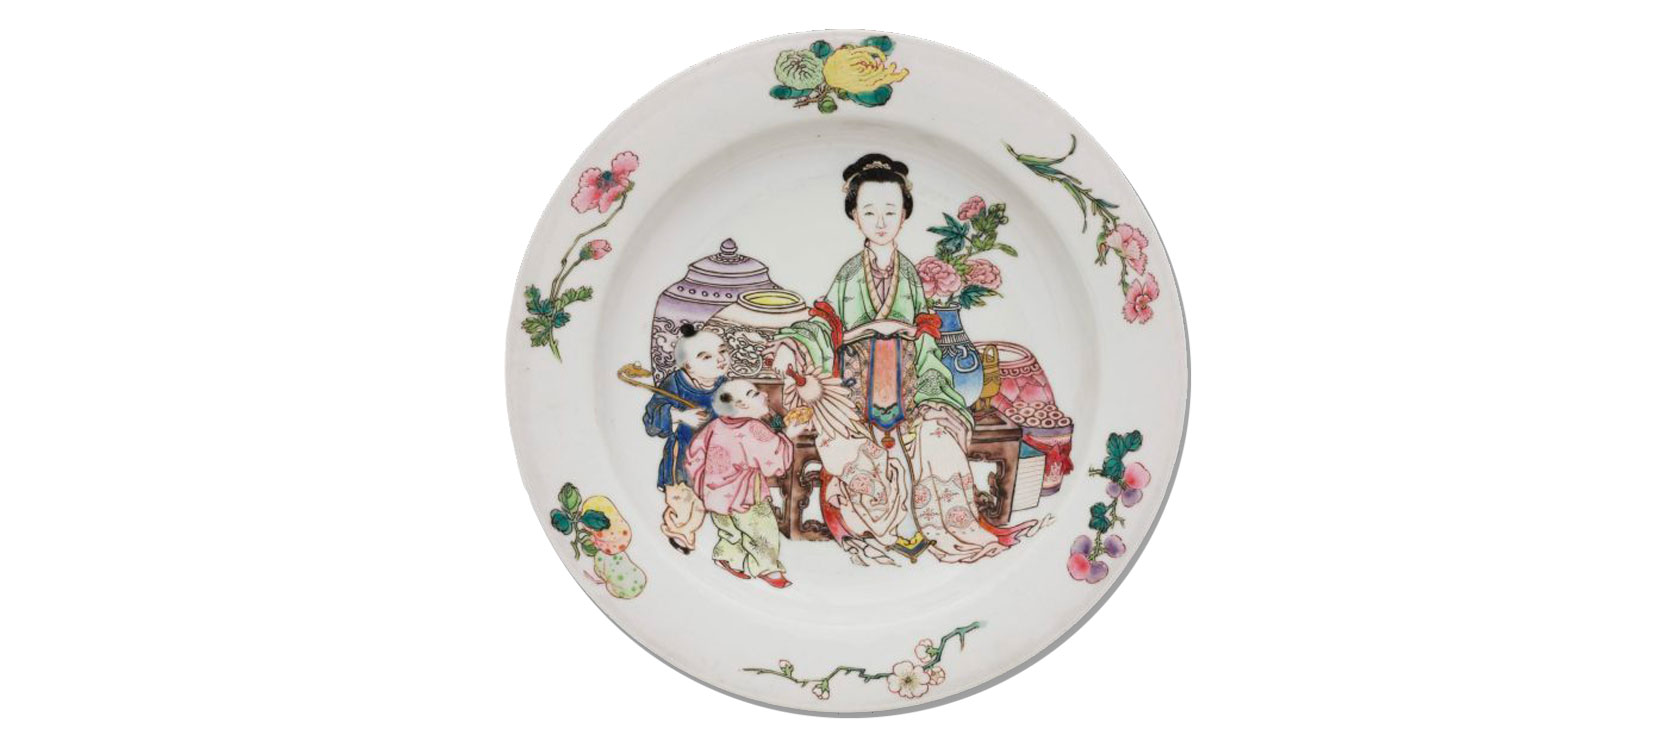 Plate, China, 1723, Qing Dynasty (1644-1911). Enamel porcelain, 8 1/8 inches (20.6375 cm). The Nelson-Atkins Museum of Art, Kansas City, Missouri. Purchase: Willliam Rockhill Nelson Trust, 60-73/1.